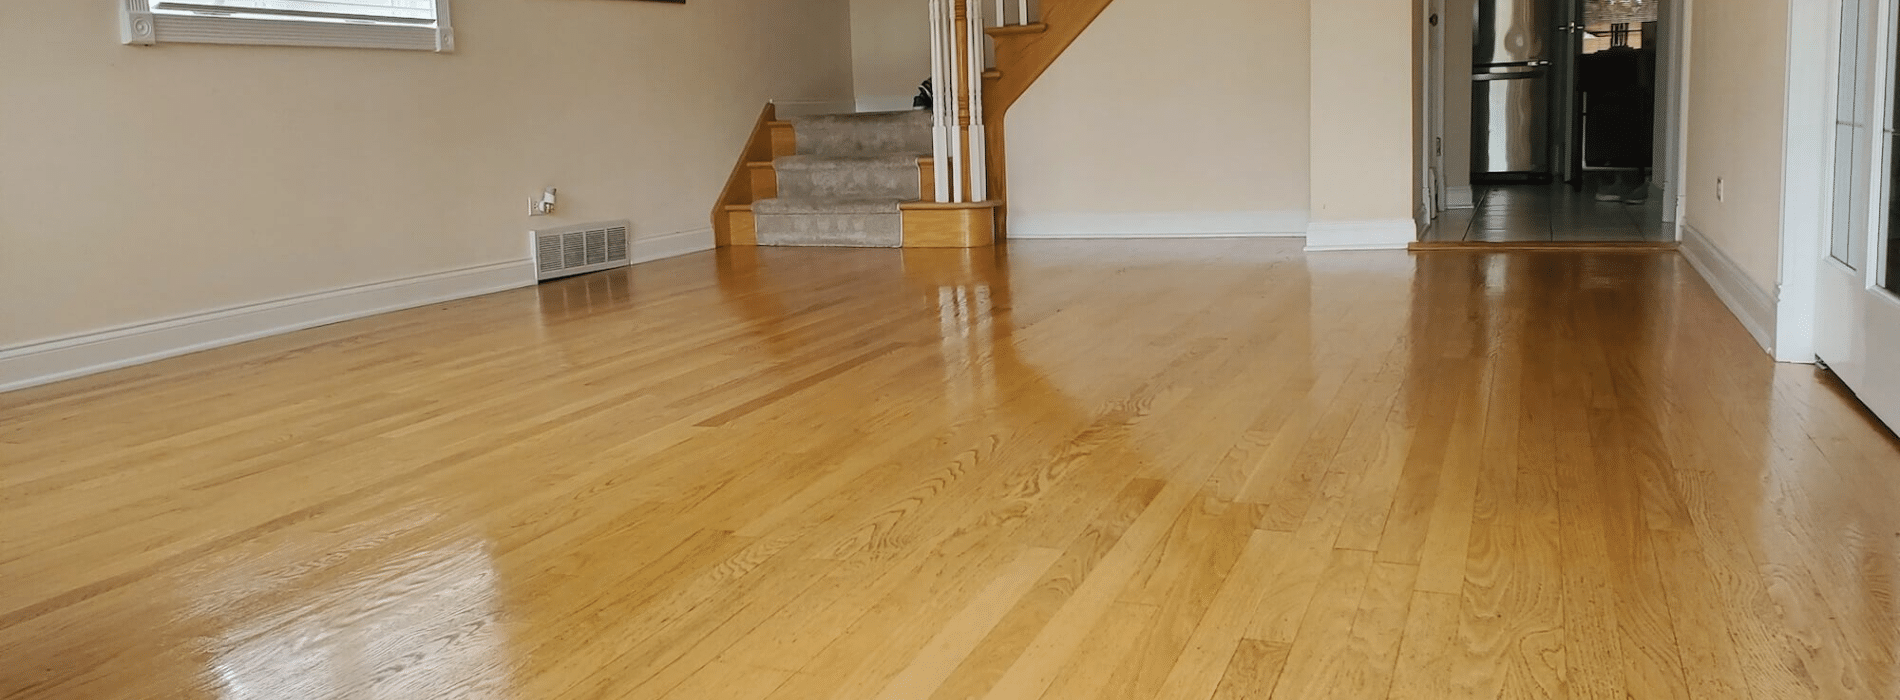 Meticulously restored 5-year-old engineered oak floors by Mr Sander® in Park Royal, NW10. Witness the captivating beauty of perfectly sanded and sealed floors. Expert craftsmanship brings out the natural allure. Junckers Strong satin finish ensures lasting durability.